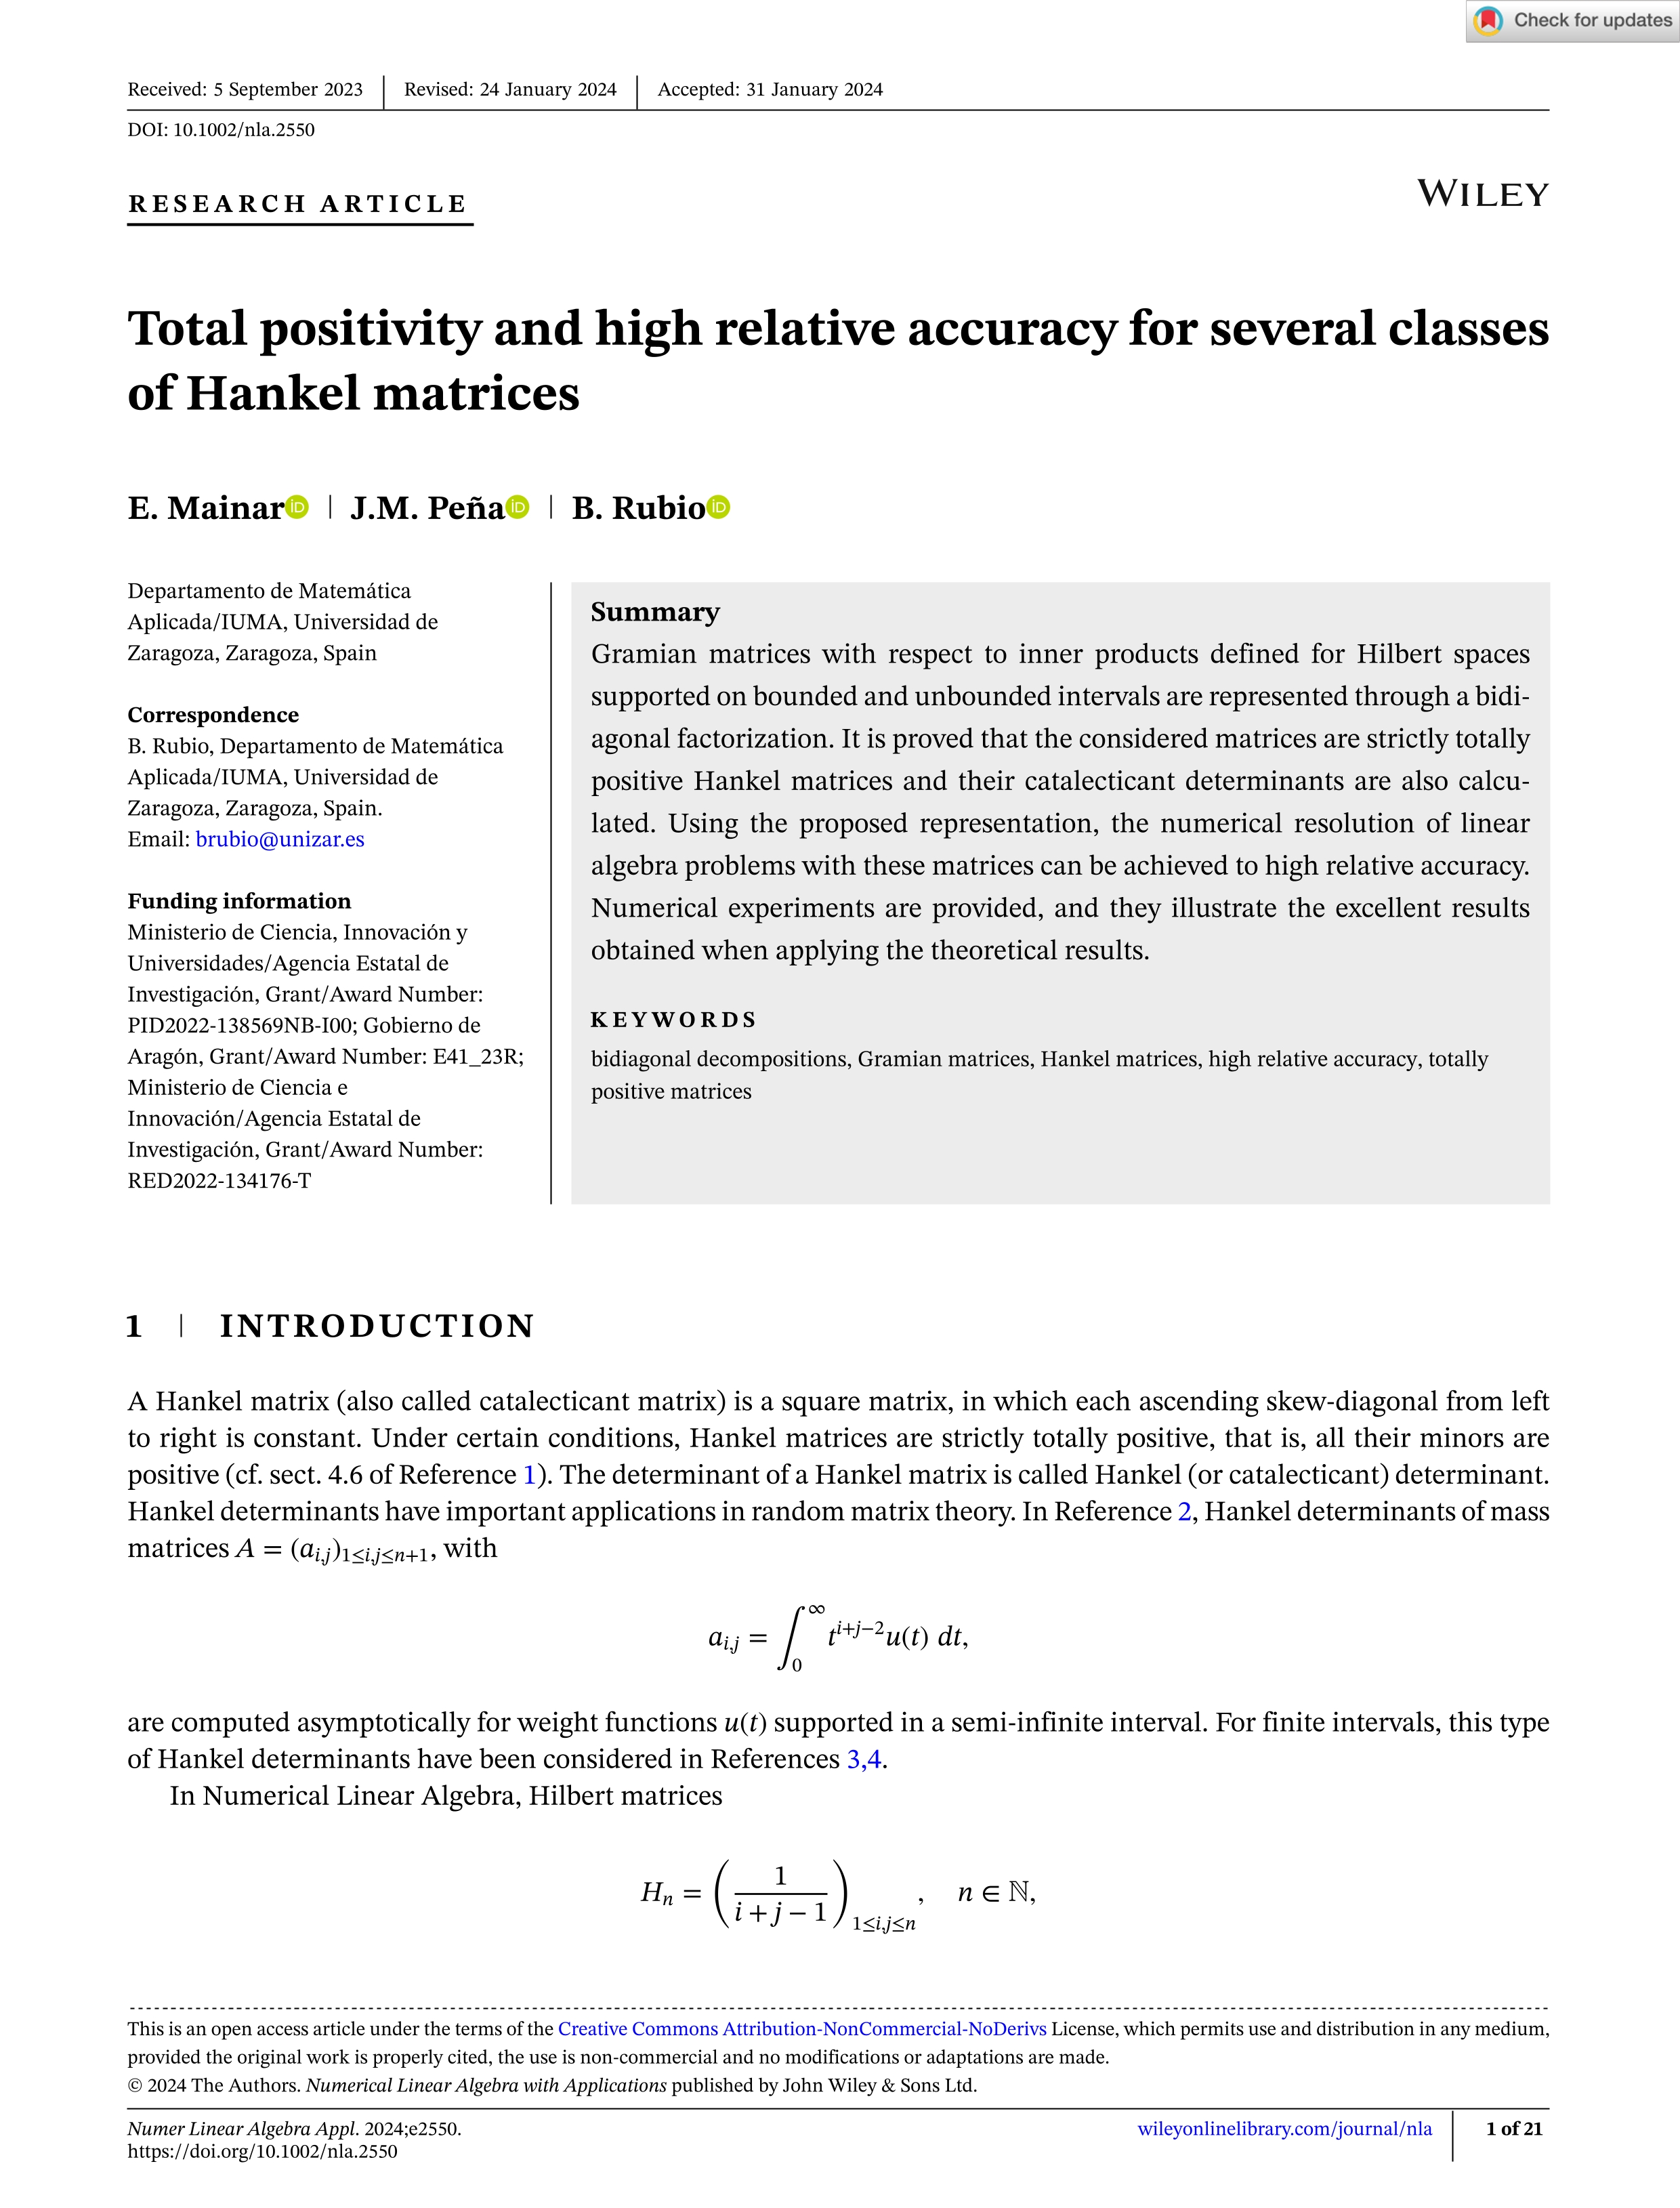 Total positivity and high relative accuracy for several classes of Hankel matrices